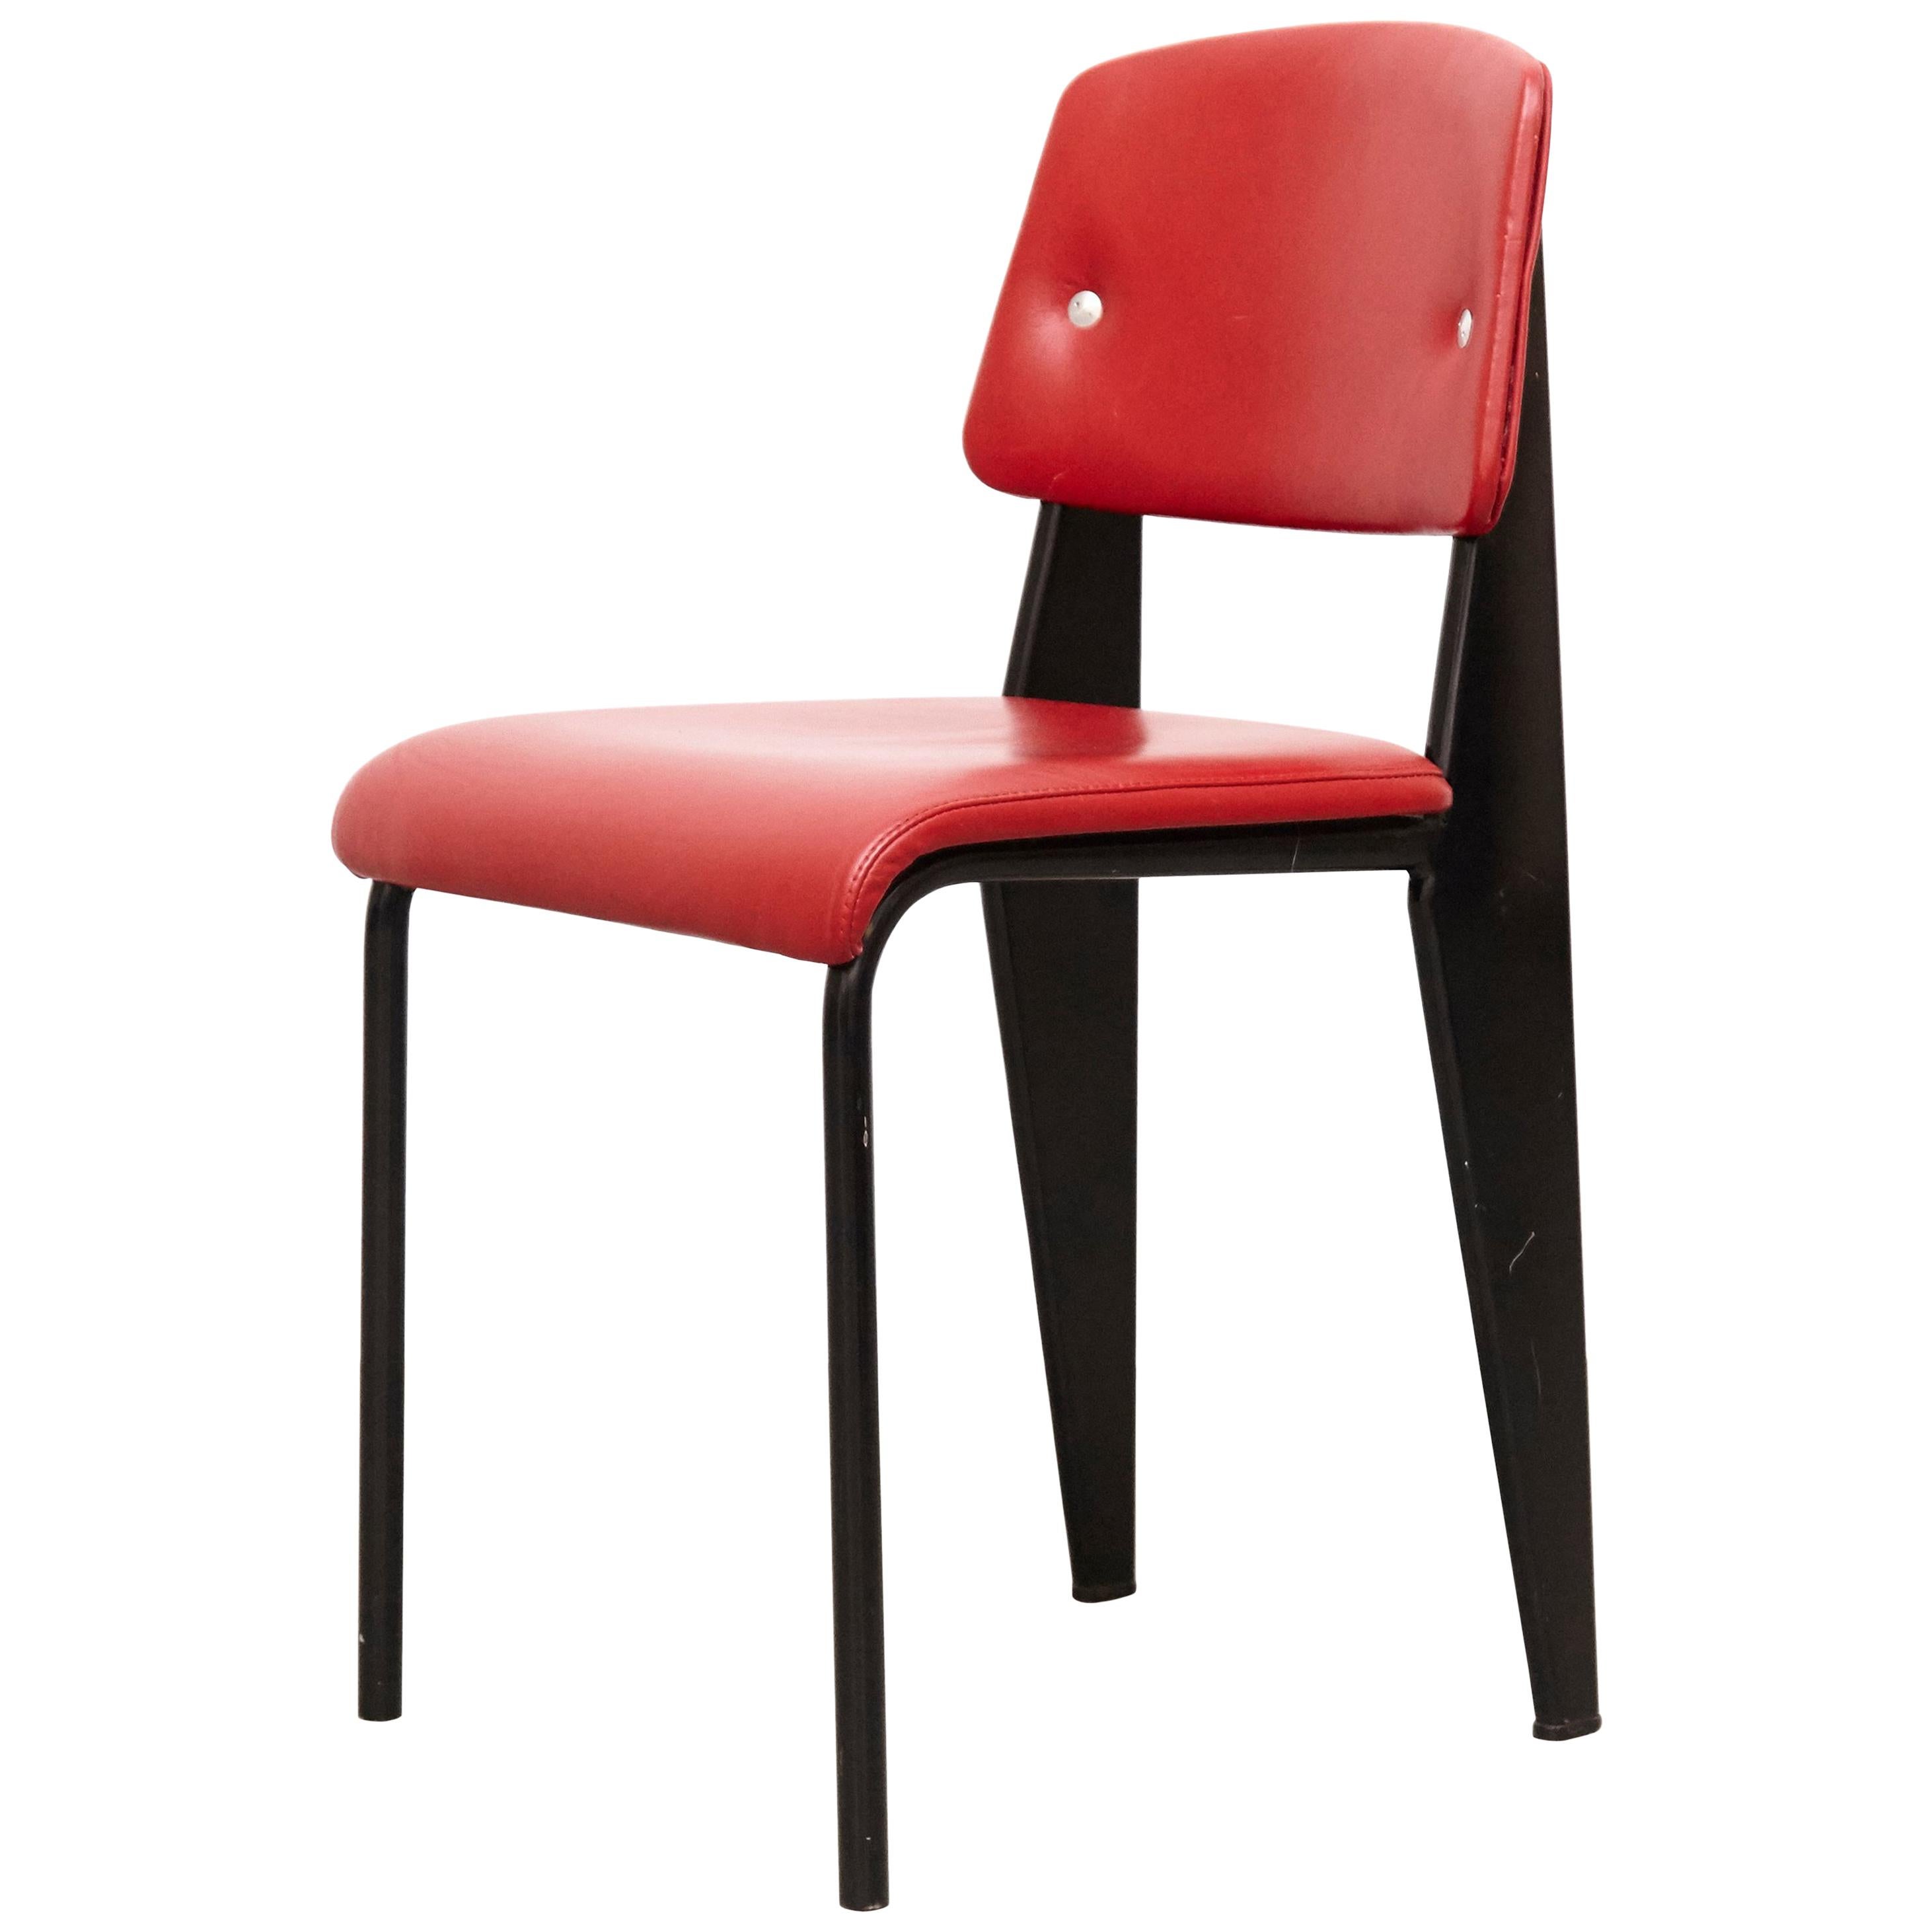 Jean Prouvé Mid Century Modern Red Upholstered Standard Chair, circa 1950